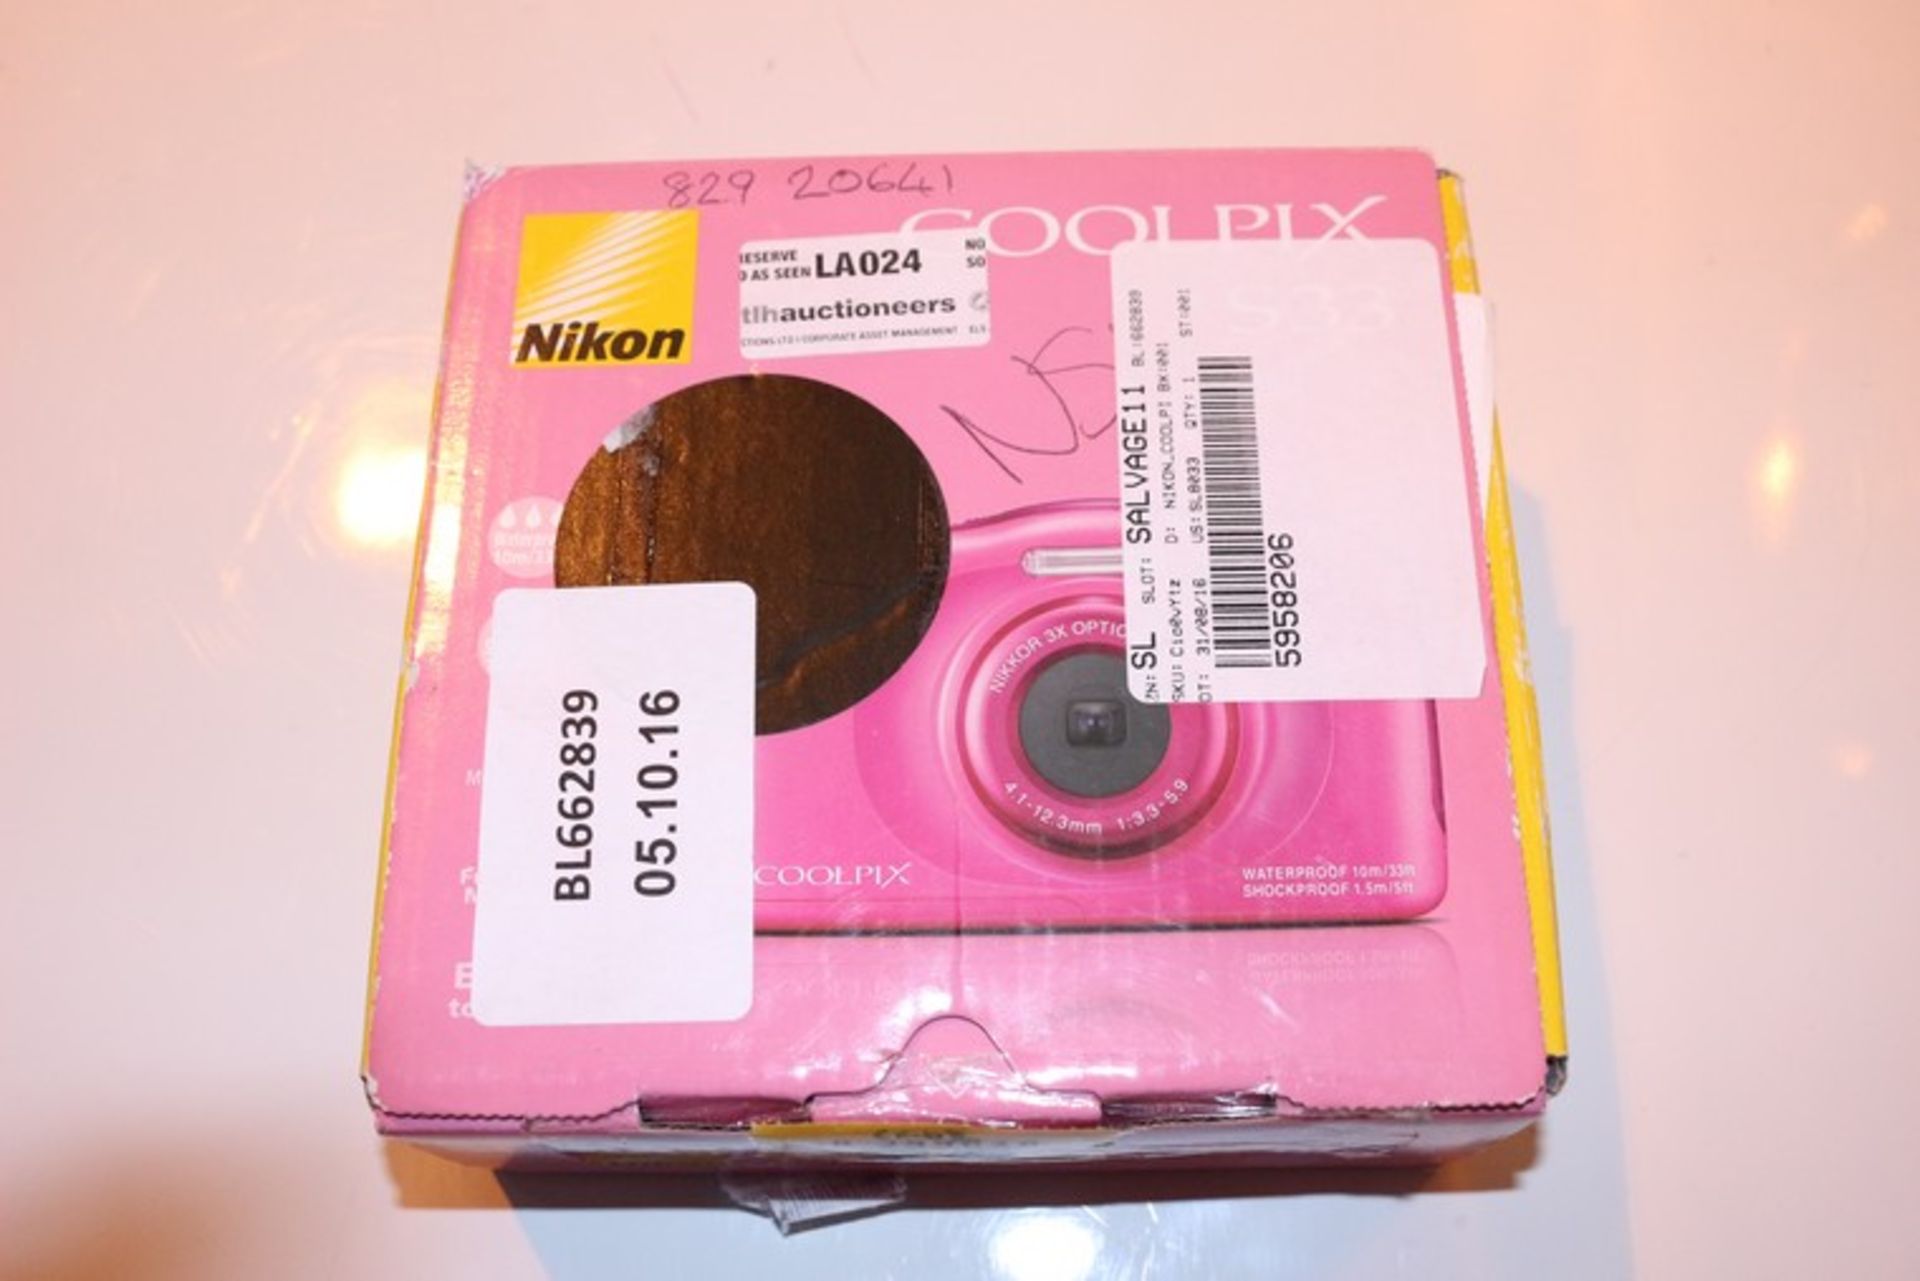 1 x BOXED NIKON COOLPIX S3 DIGITAL CAMERA *PLEASE NOTE THAT THE BID PRICE IS MULTIPLIED BY THE